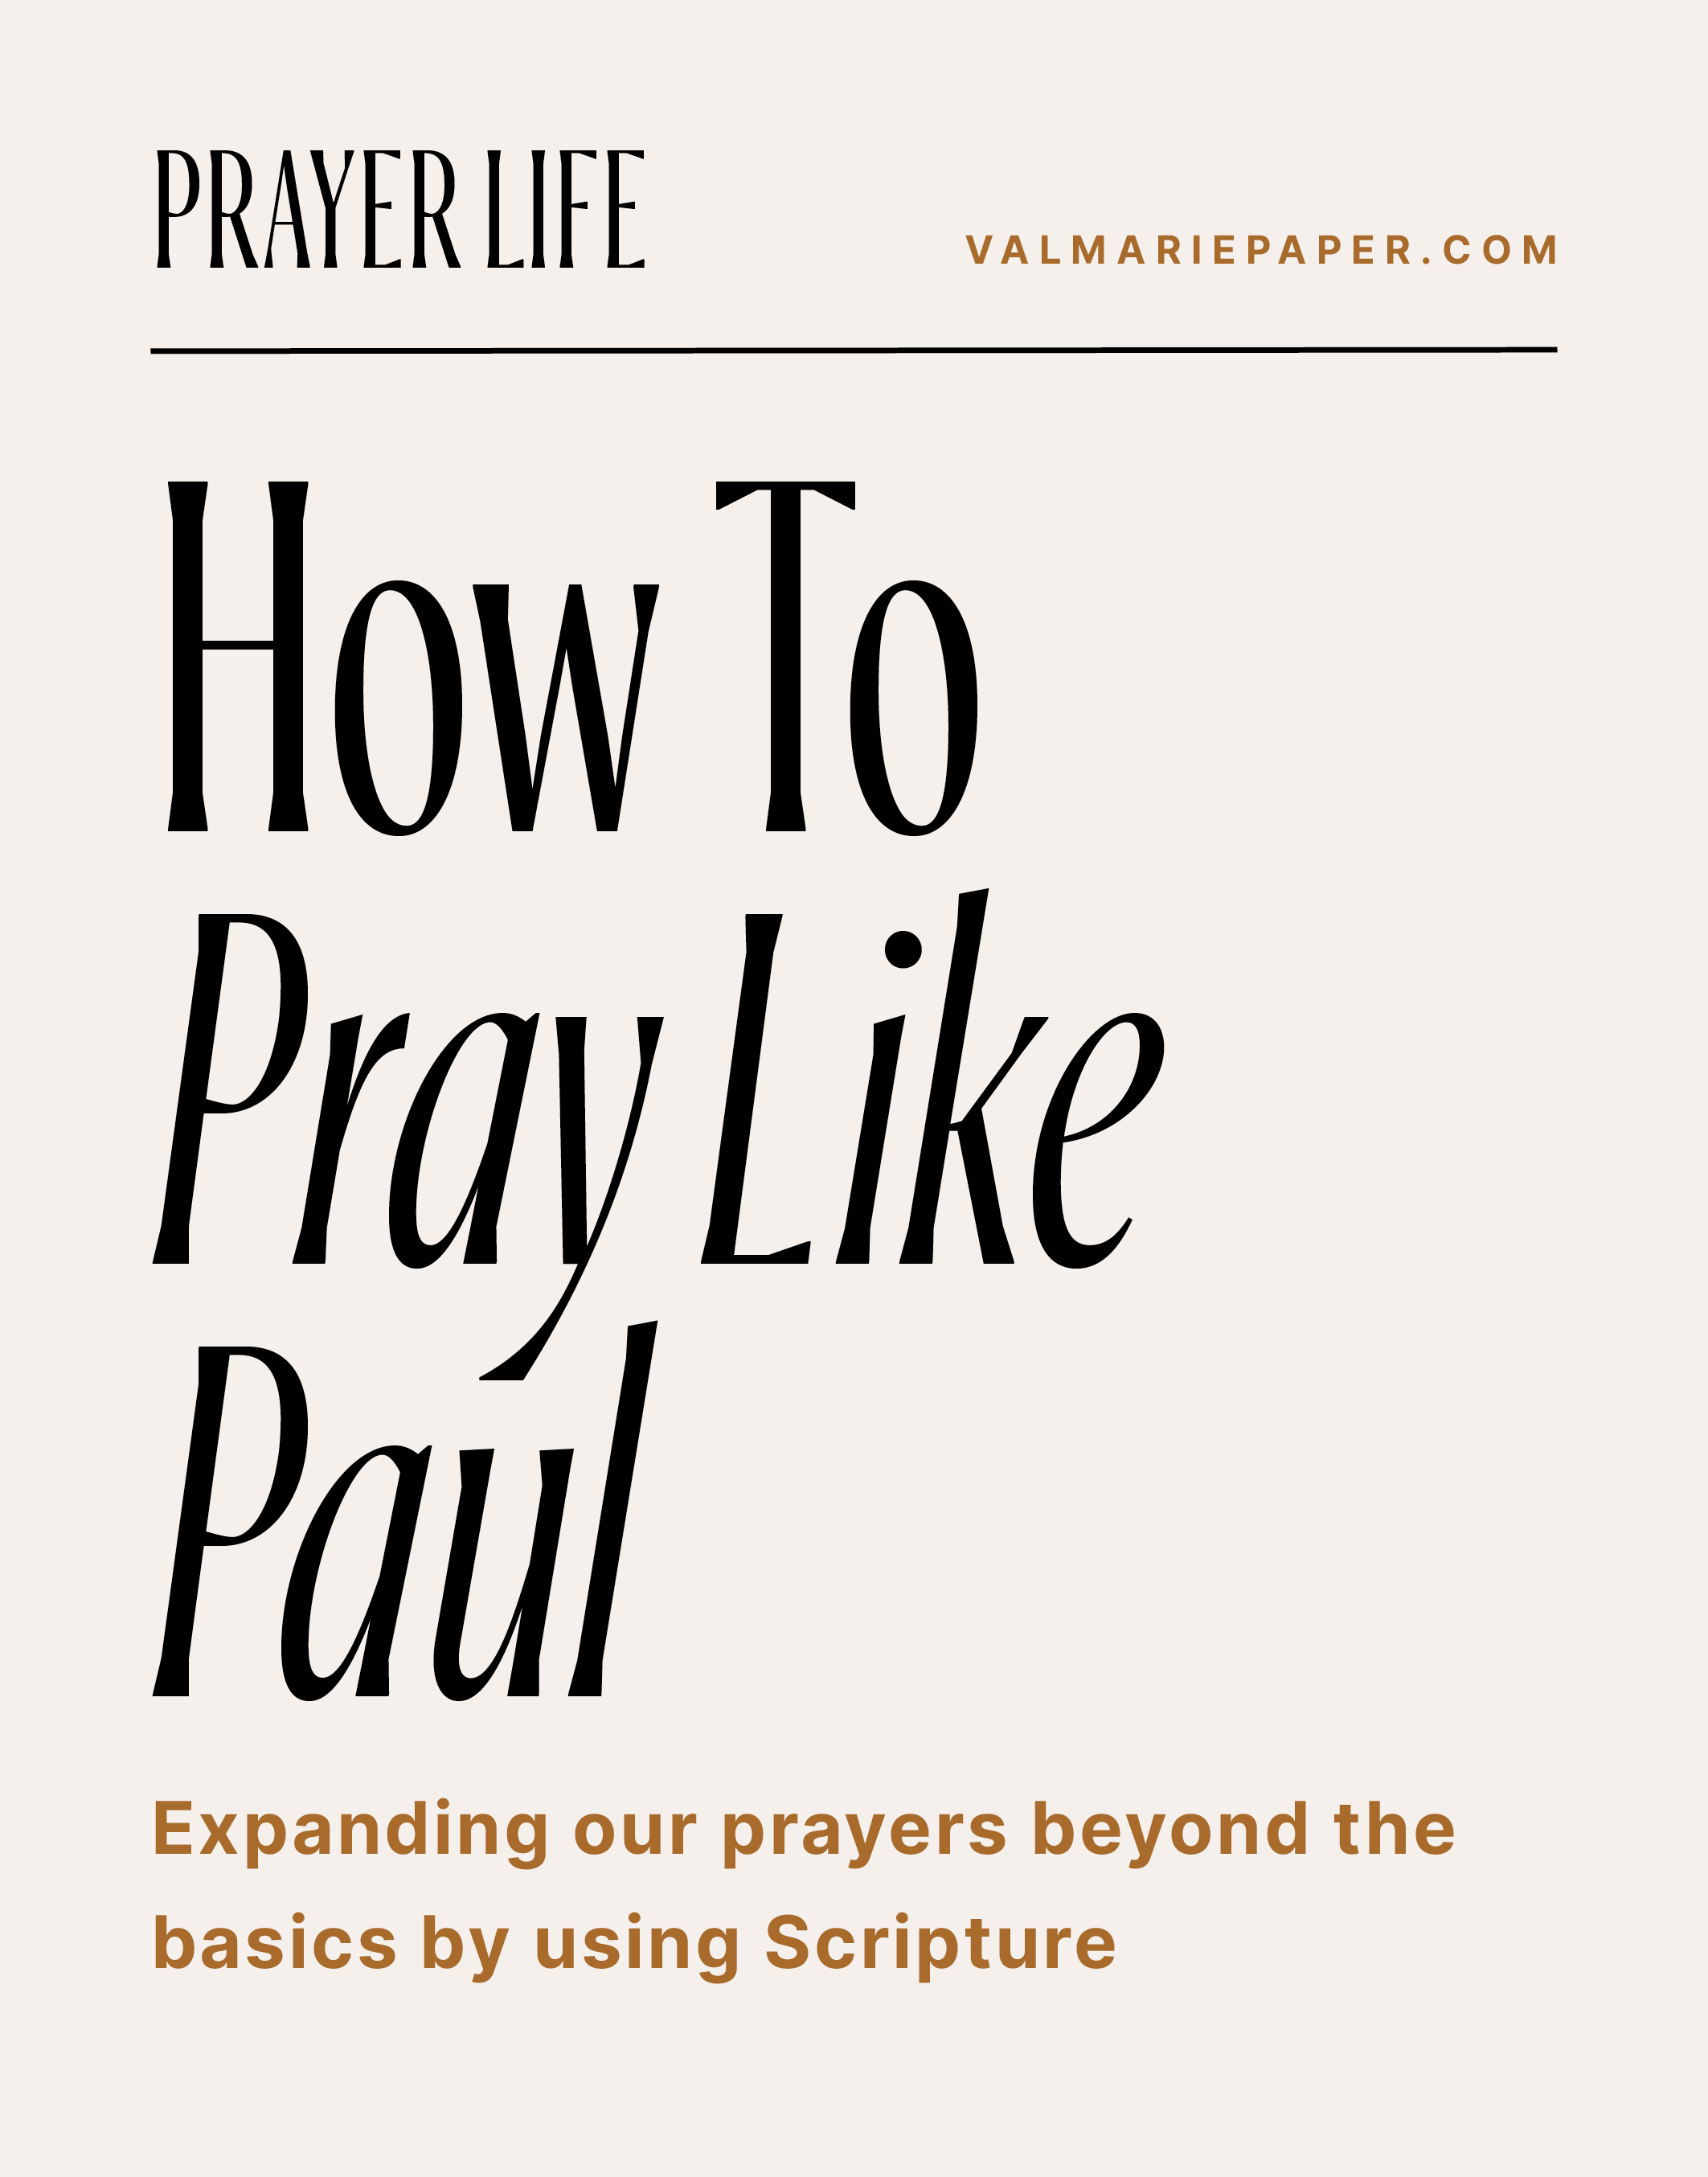 How to pray like Paul by Valerie Woerner, prayer journal, women's ministry, prayer, meditation, how to make a prayer journal, prayer warrior, war room, Bible study, tools, prayer notebook, how to pray